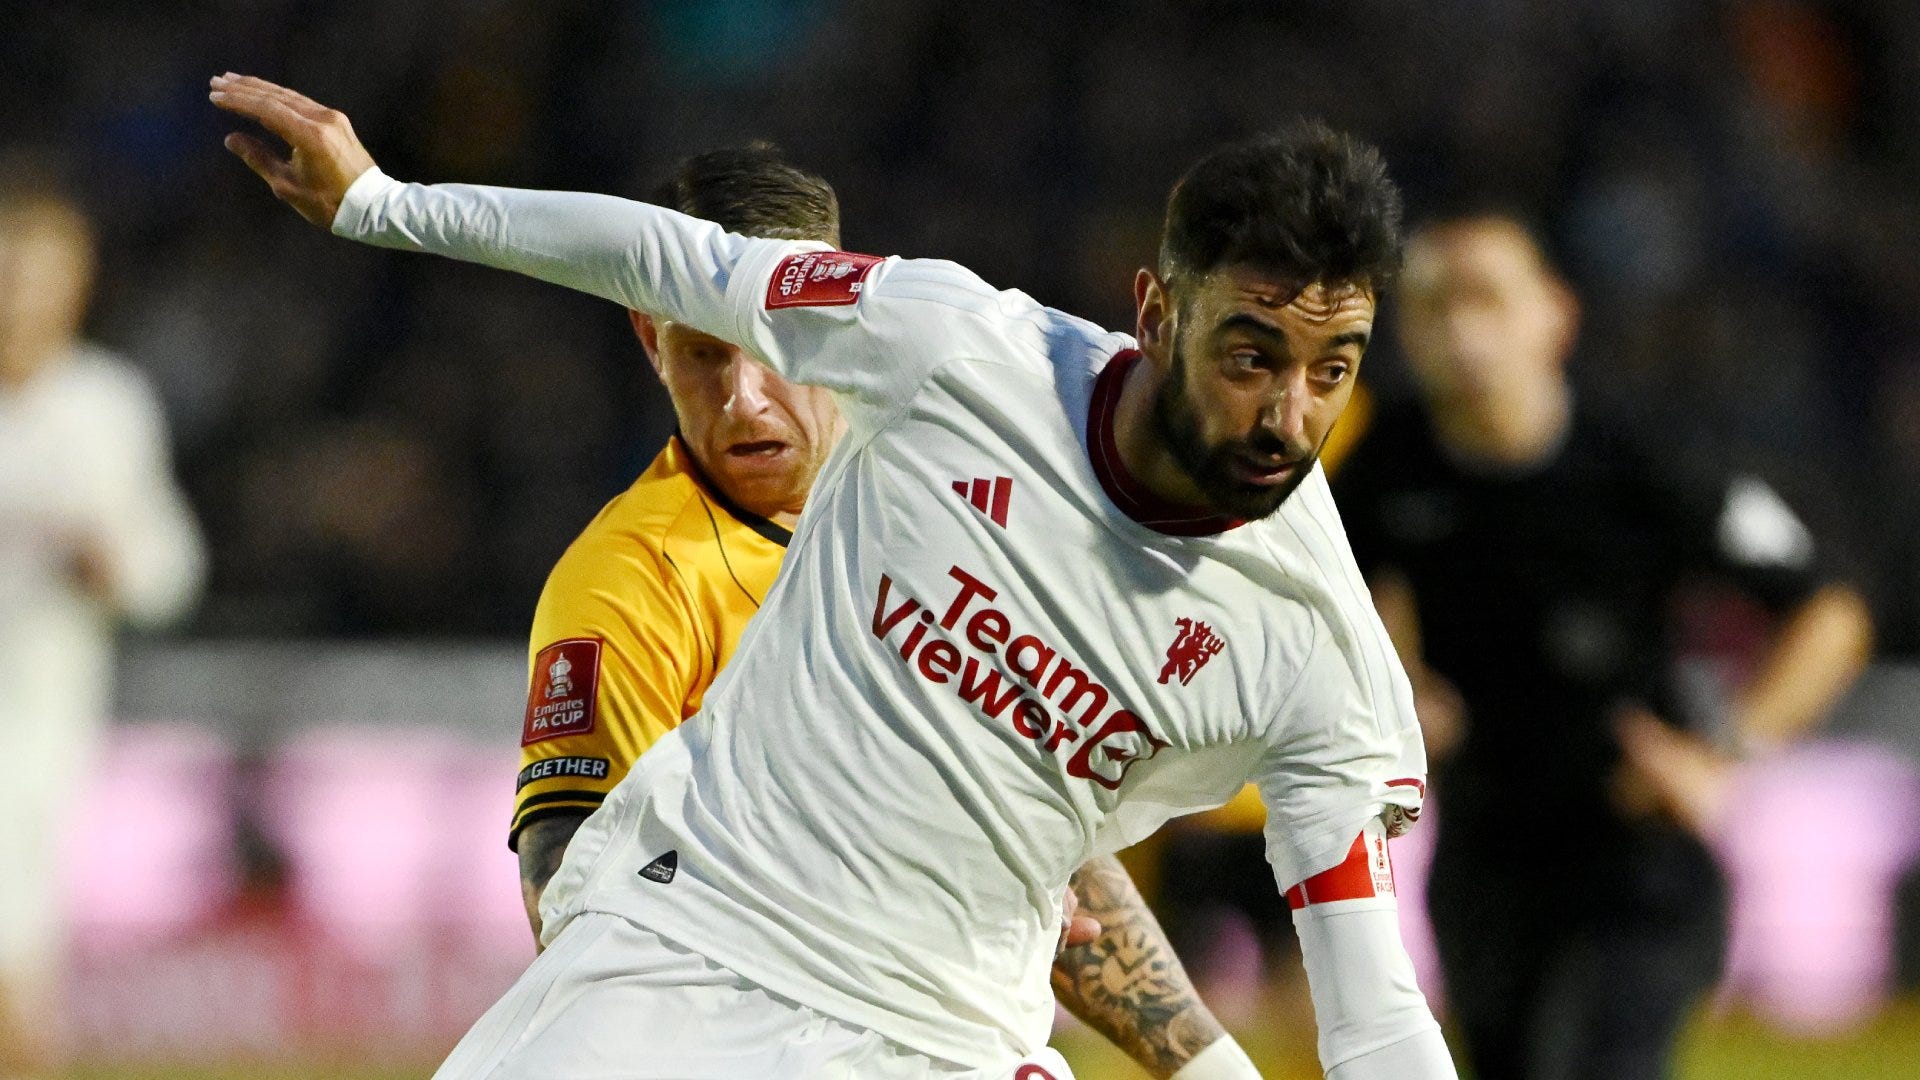 ‘Everyone wanted to score’ – Bruno Fernandes slams Man Utd team-mates for complacency after Newport scare as he warns FA Cup glory is only way to salvage nightmare season